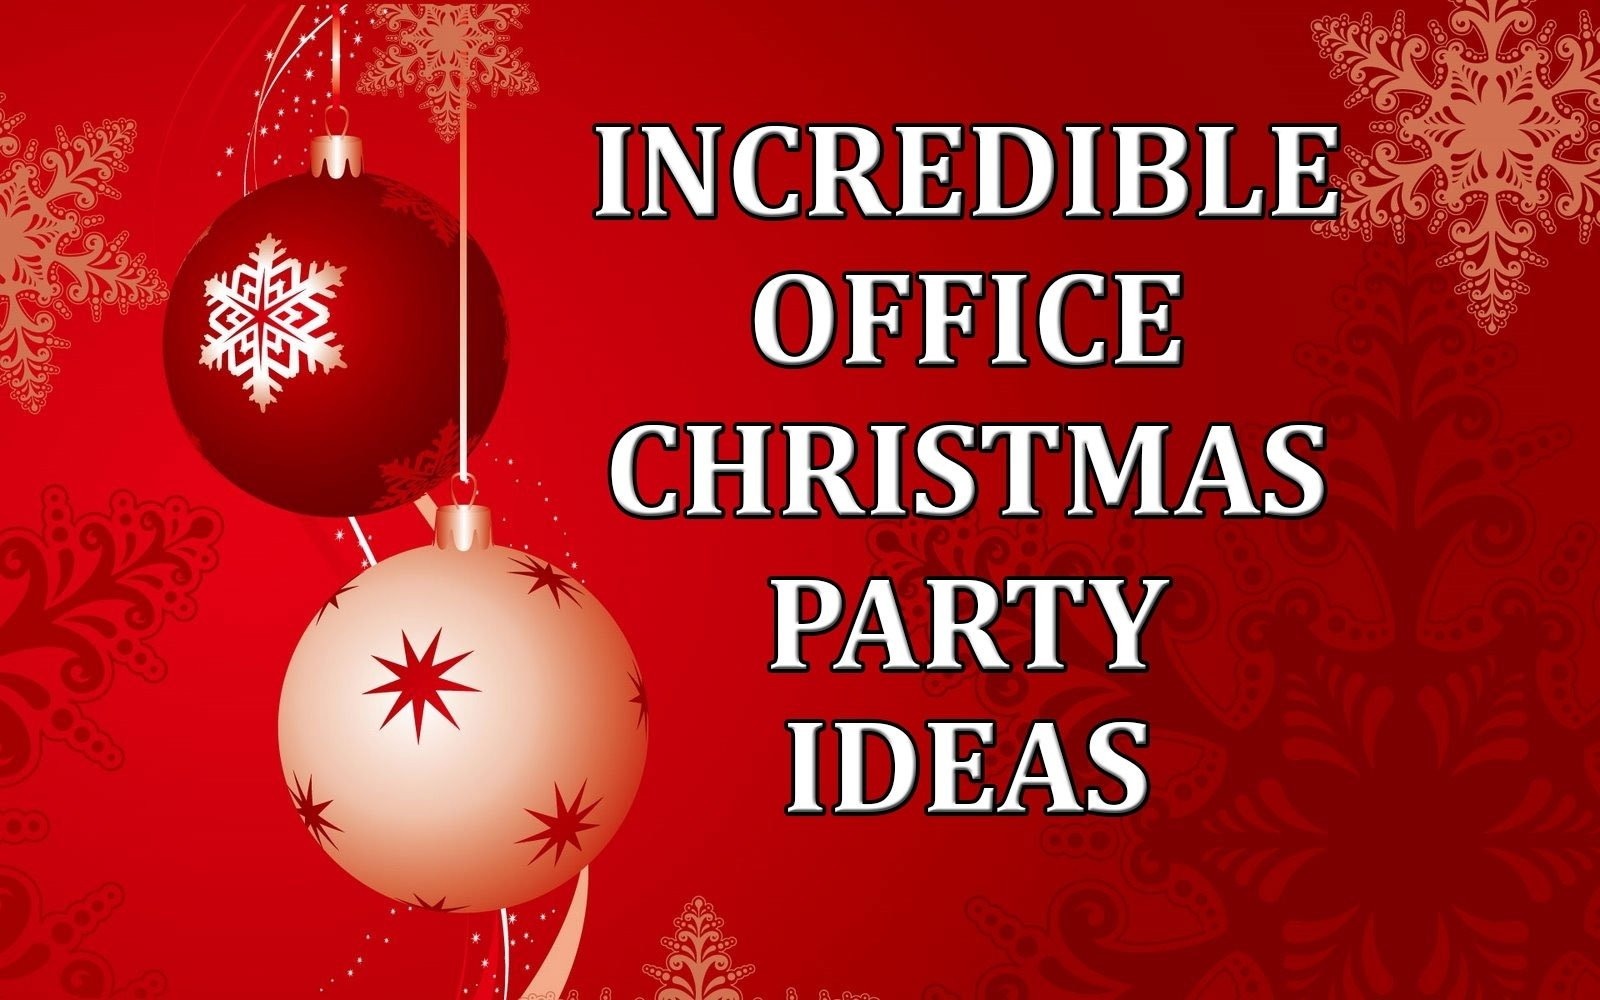 Corporate Holiday Party Entertainment Ideas
 10 Attractive Corporate Holiday Party Entertainment Ideas 2019